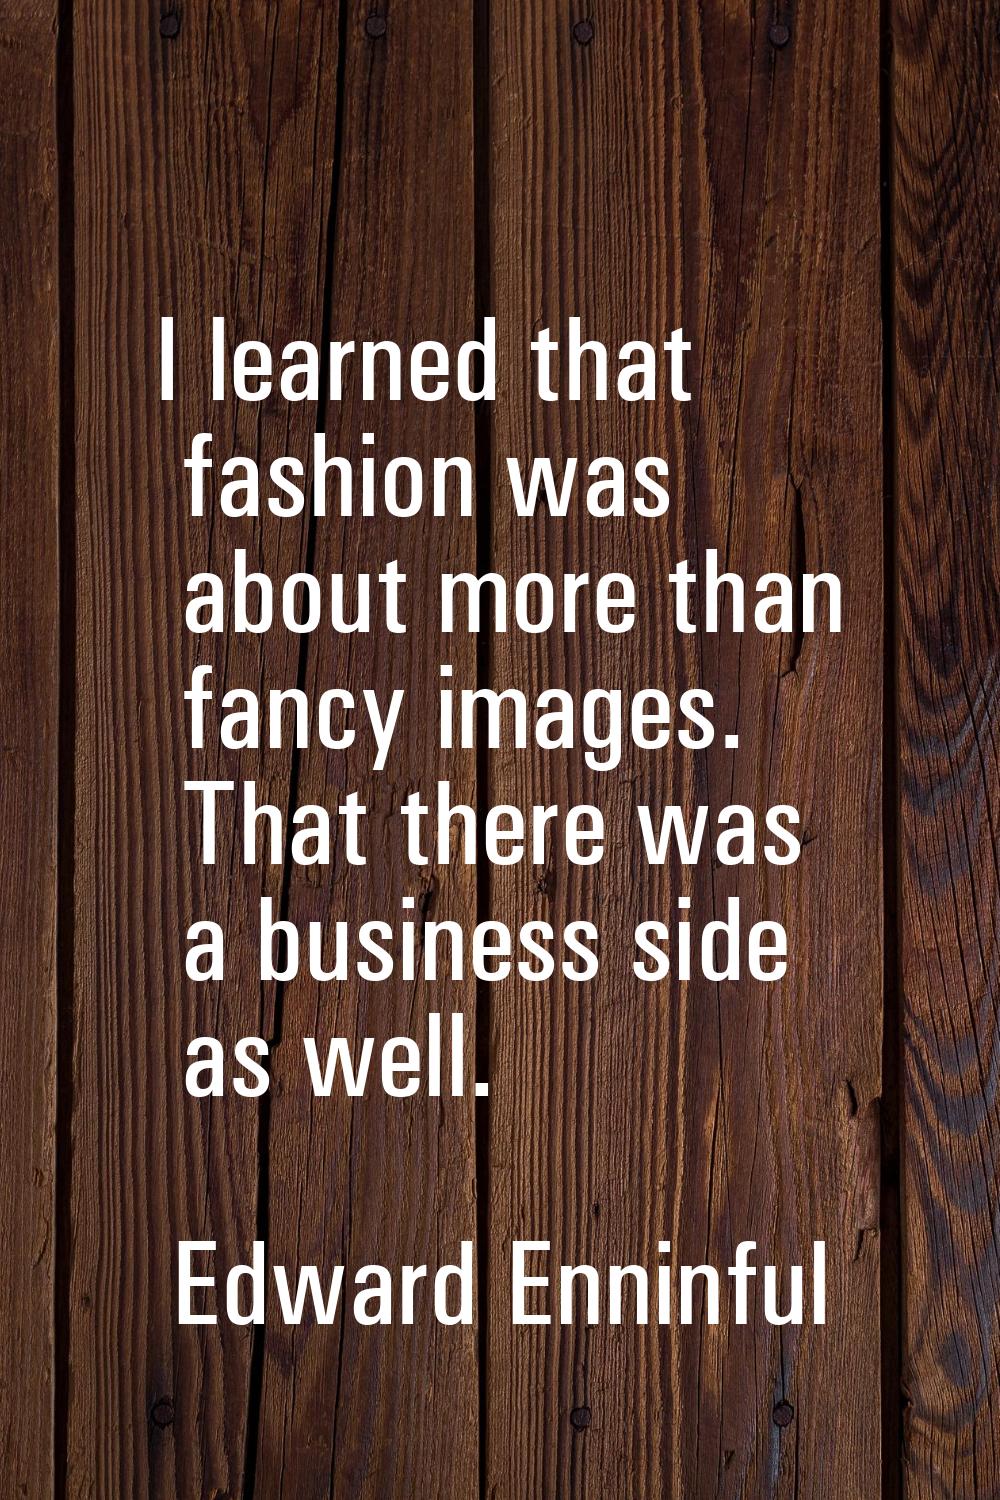 I learned that fashion was about more than fancy images. That there was a business side as well.